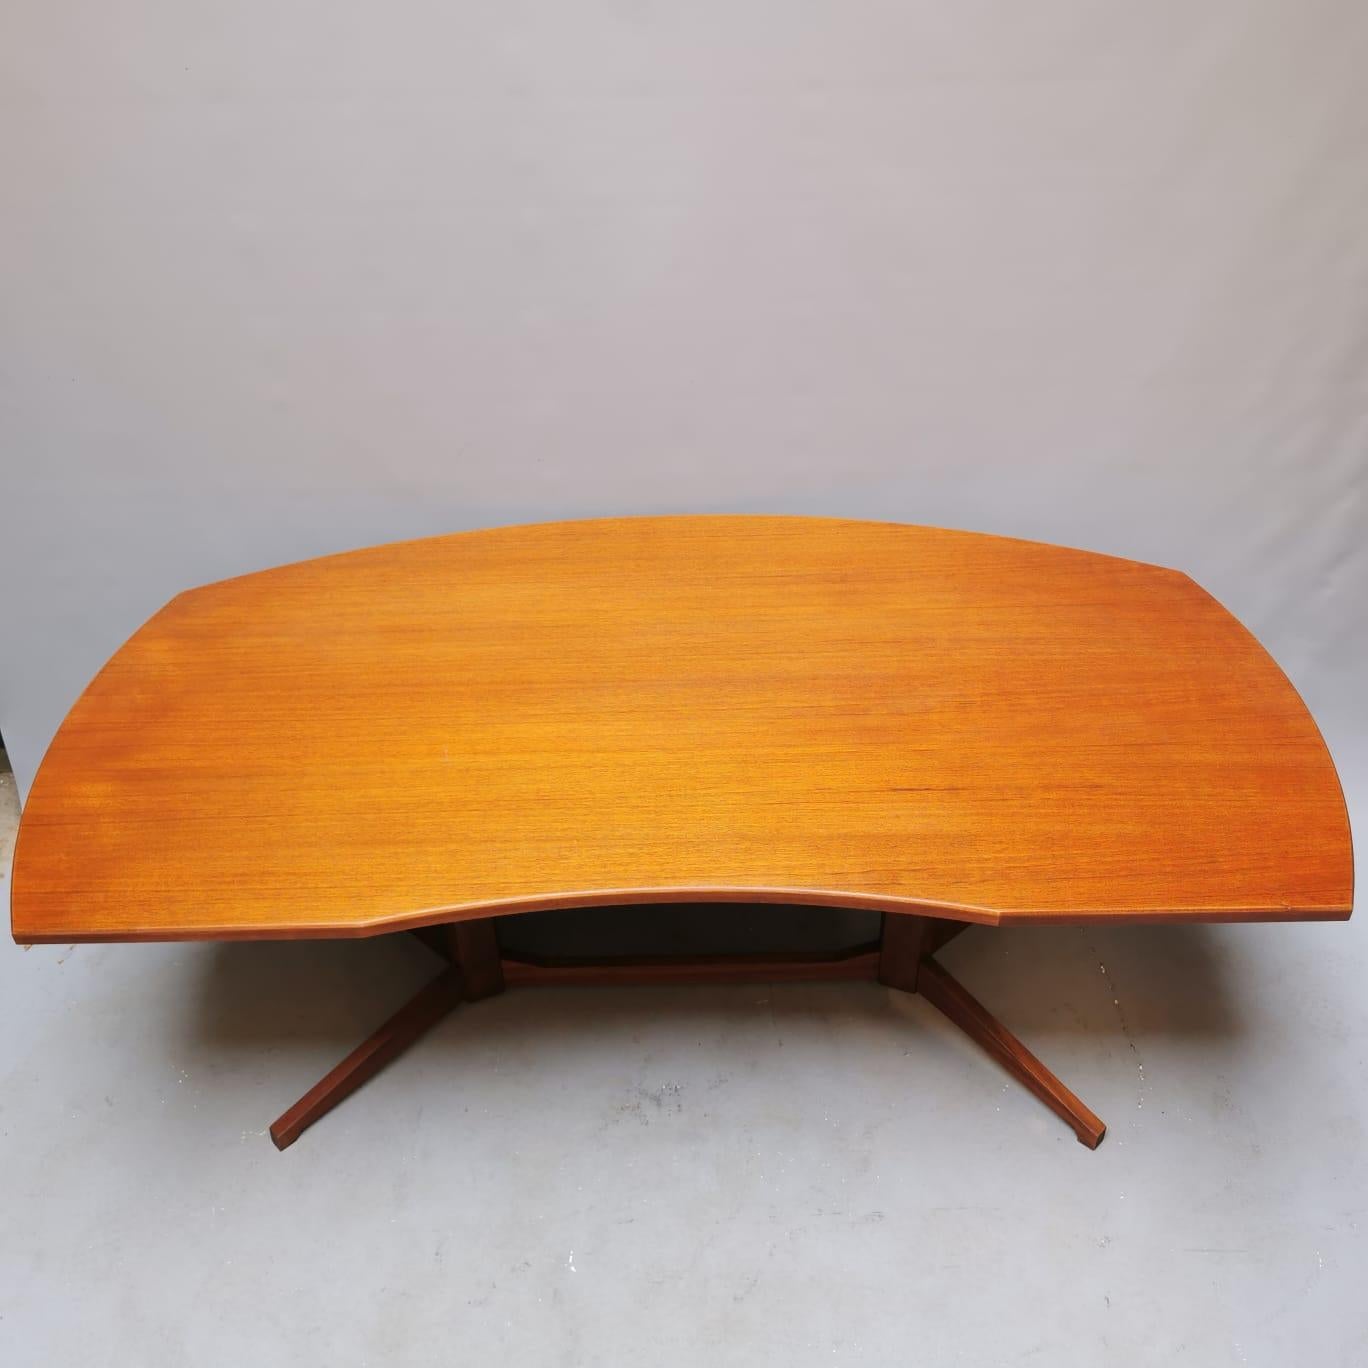 This wooden table model TL22 was designed by Franco Albini and Franca Held and manufactured in 1958 by Poggi. We restored it using our network of professional artisans in Italy. The table is in good conditions instead of a little scratch that we